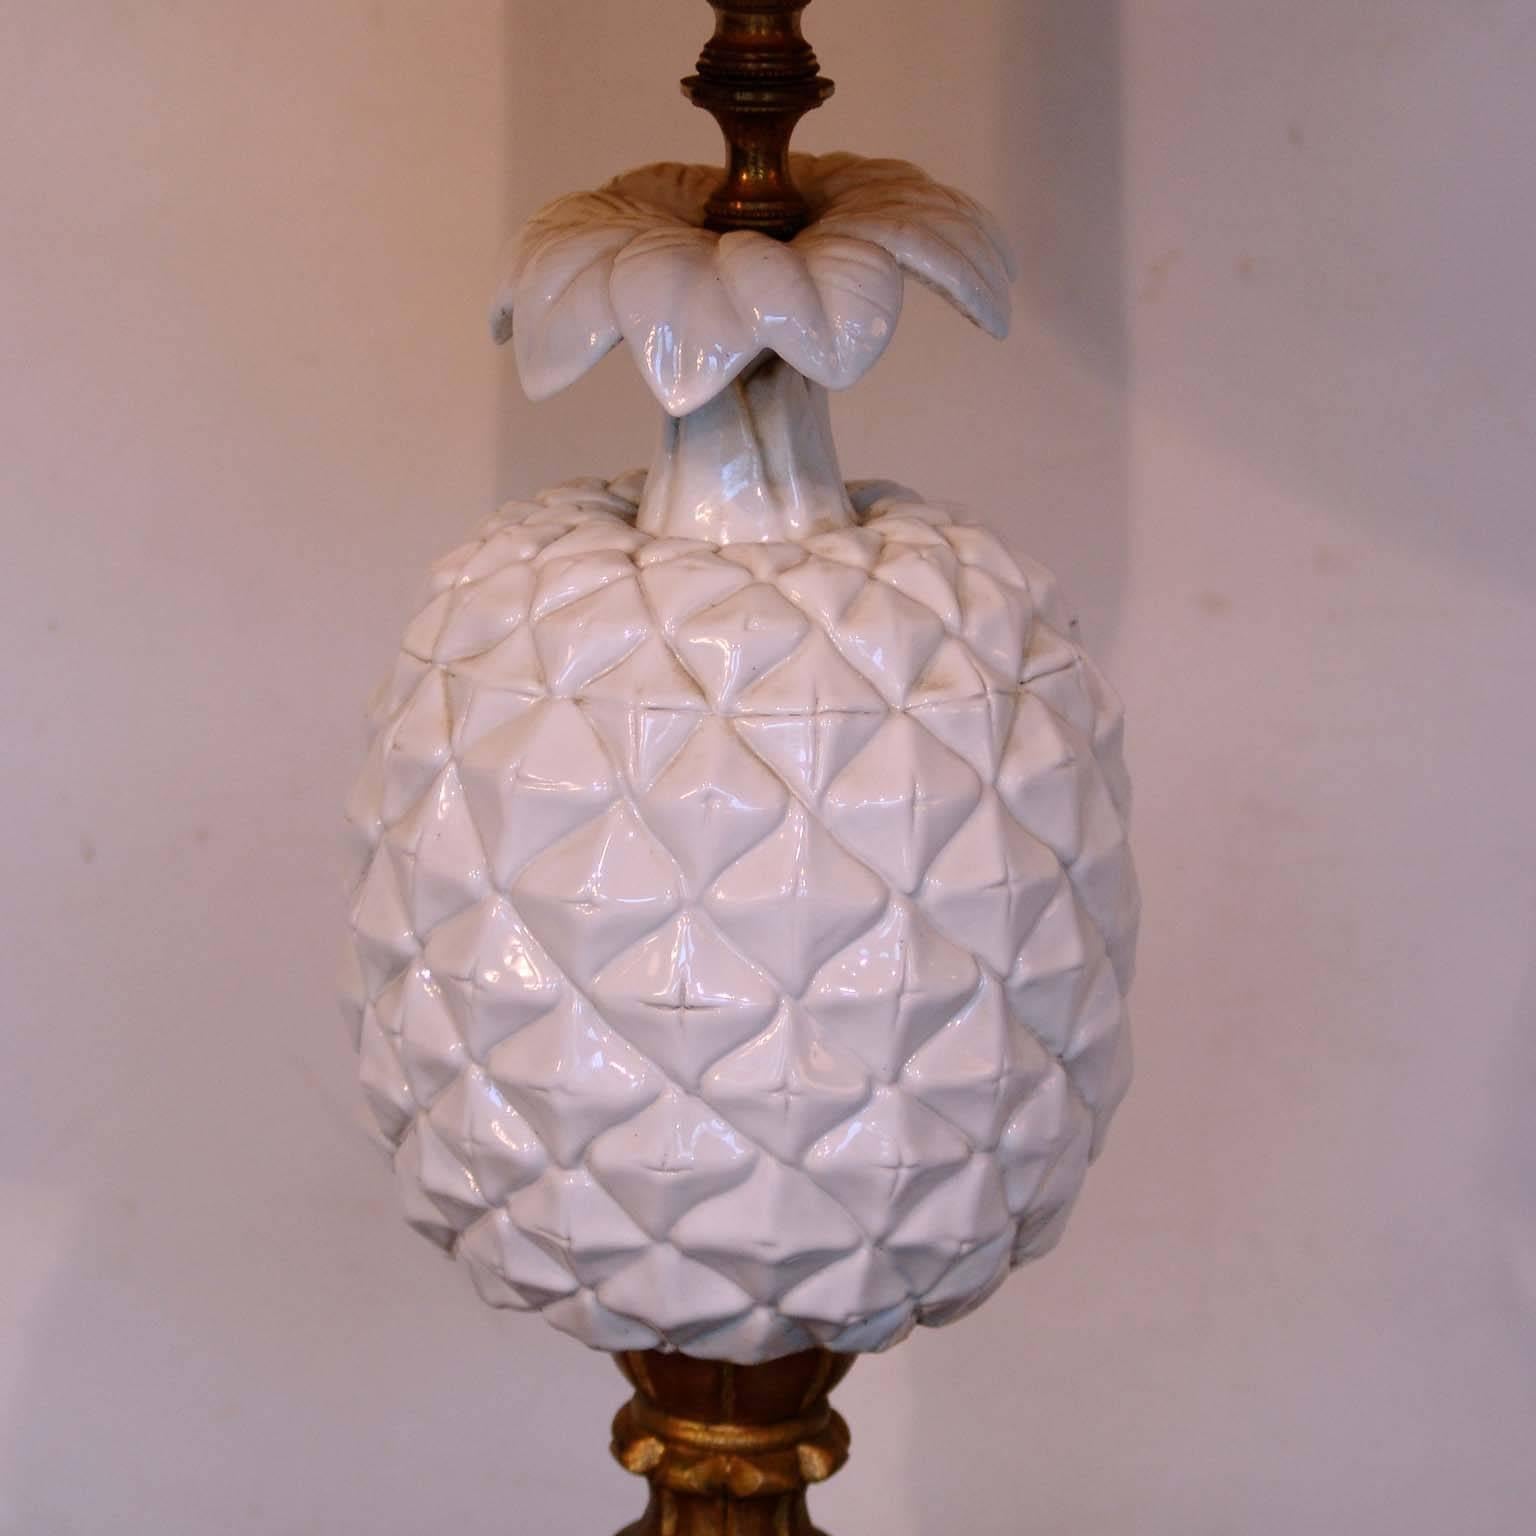 Hollywood Regency Marbro Style Antique Giltwood Table Lamp with Ceramic Pineapple For Sale